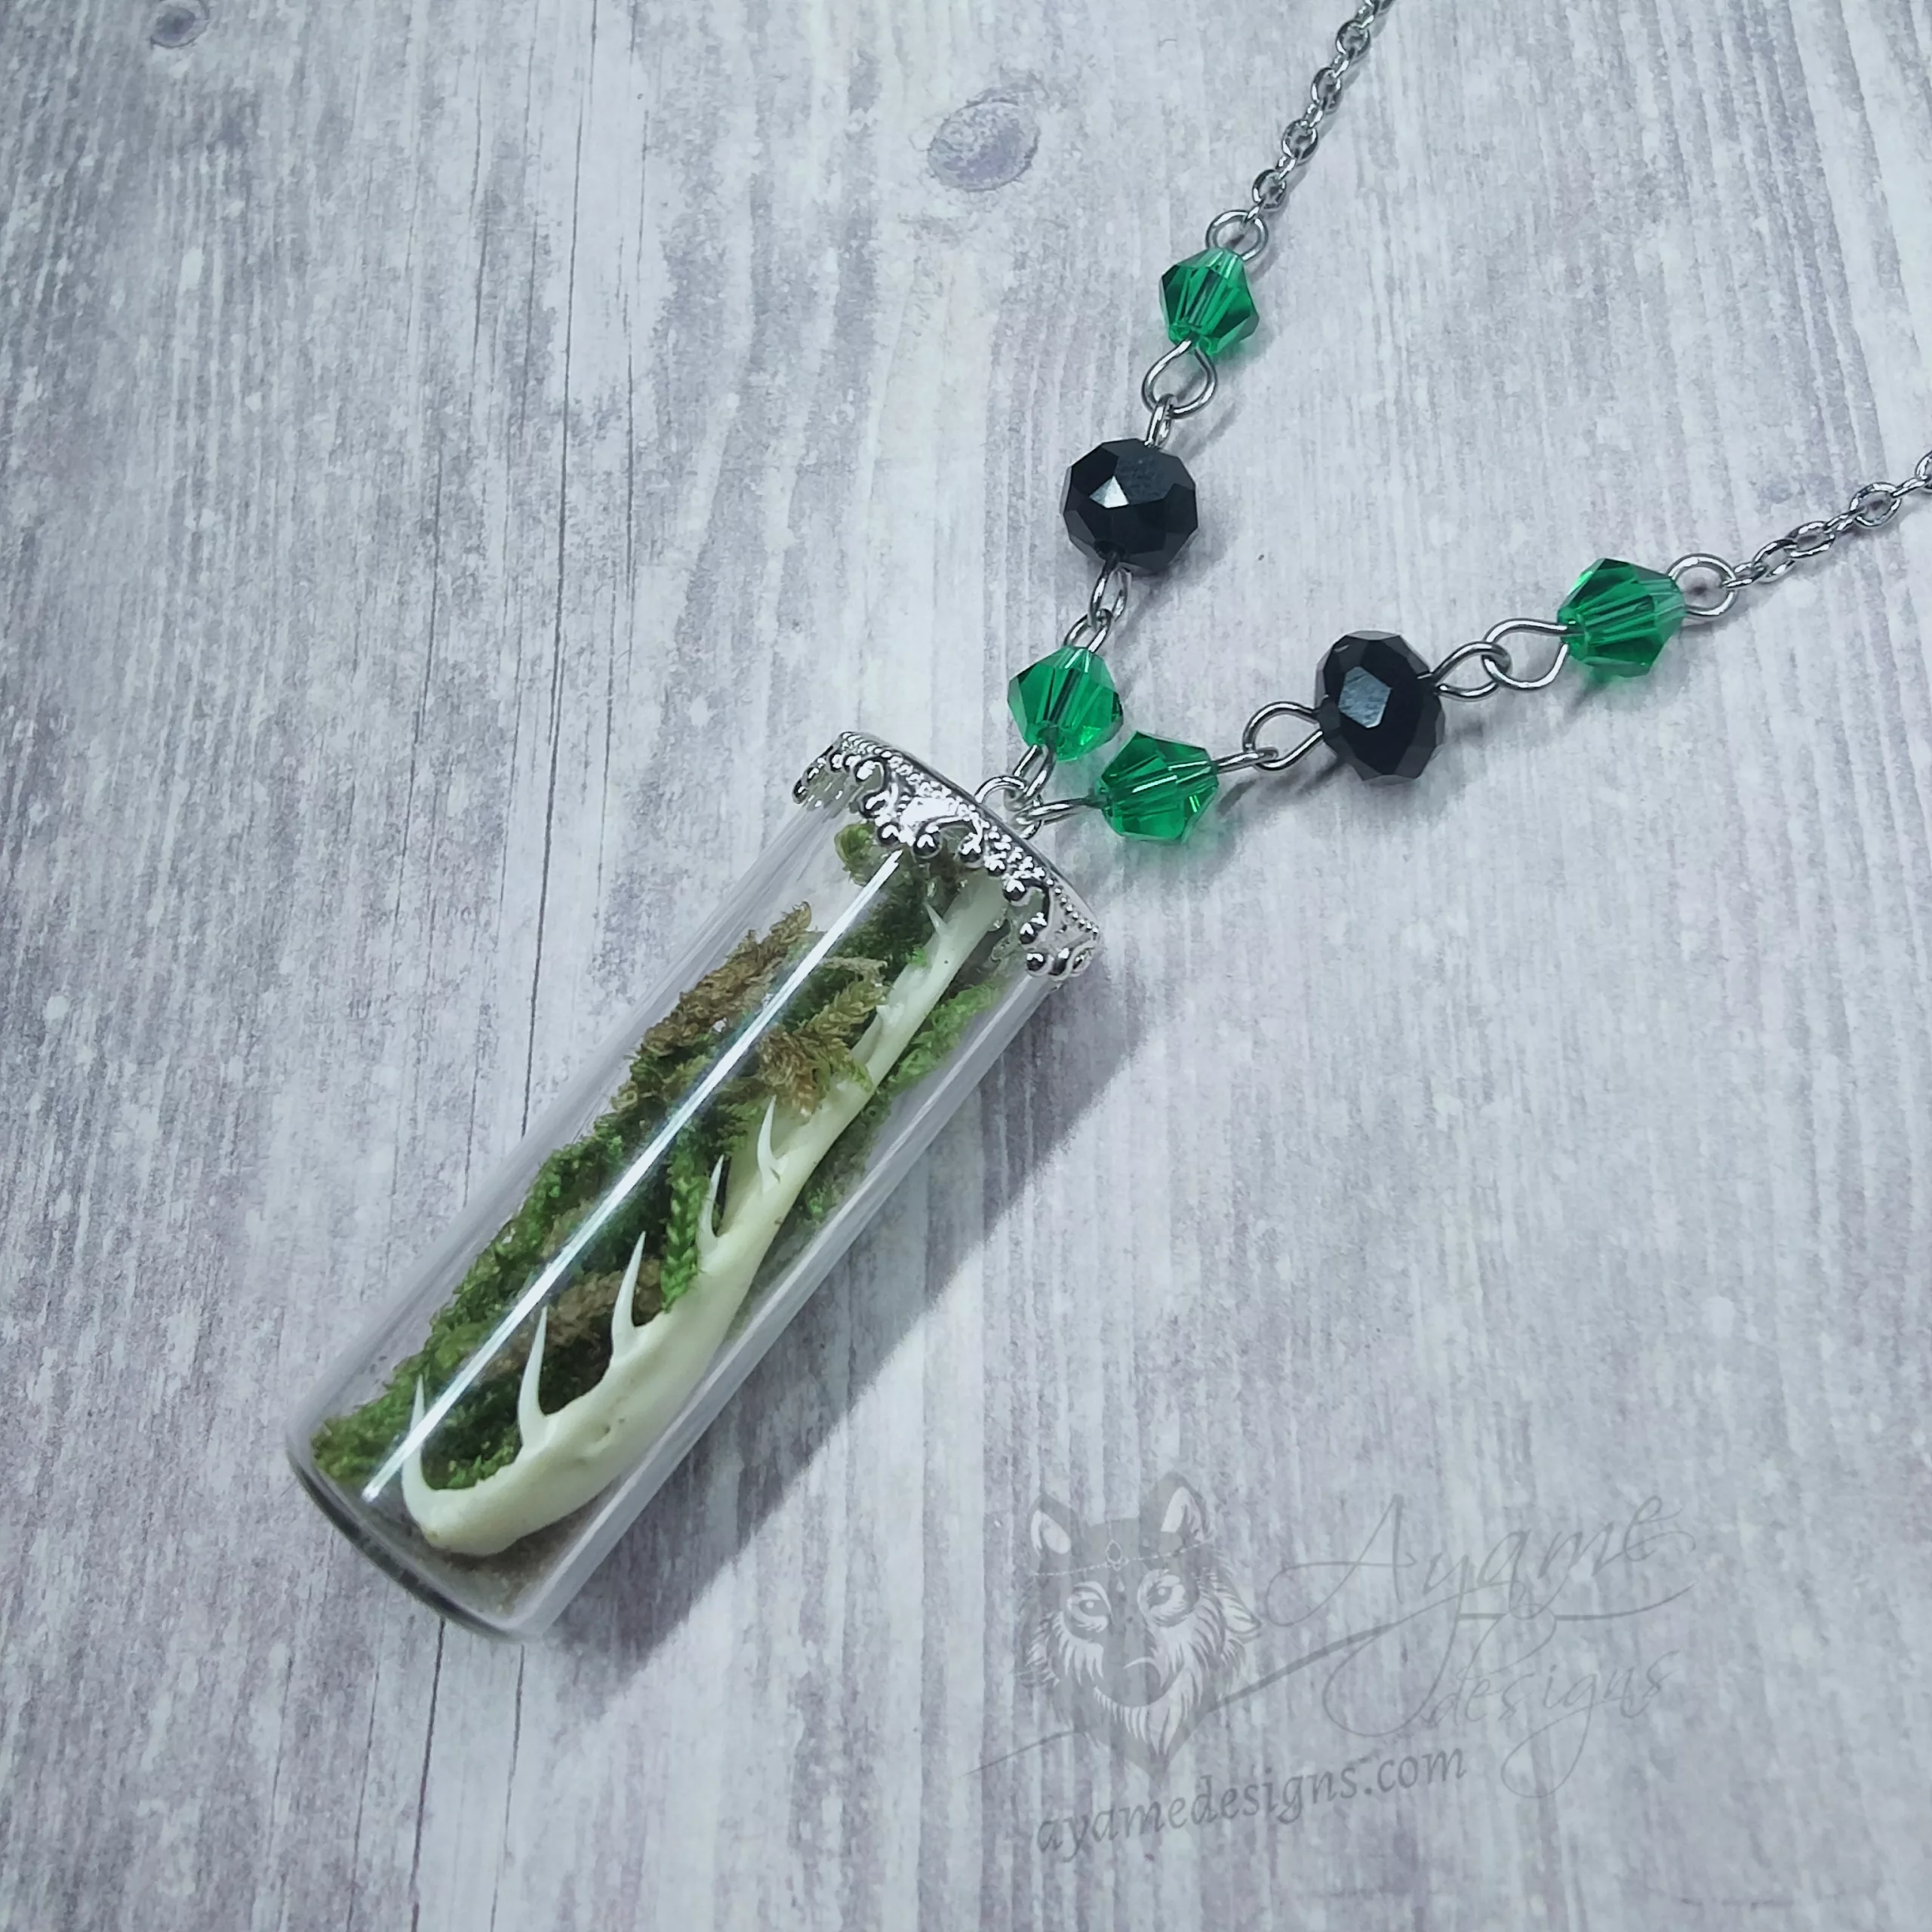 Glass vial necklace with ethically sourced snake vertebrae and moss, green and black Austrian crystal beads and stainless steel chain